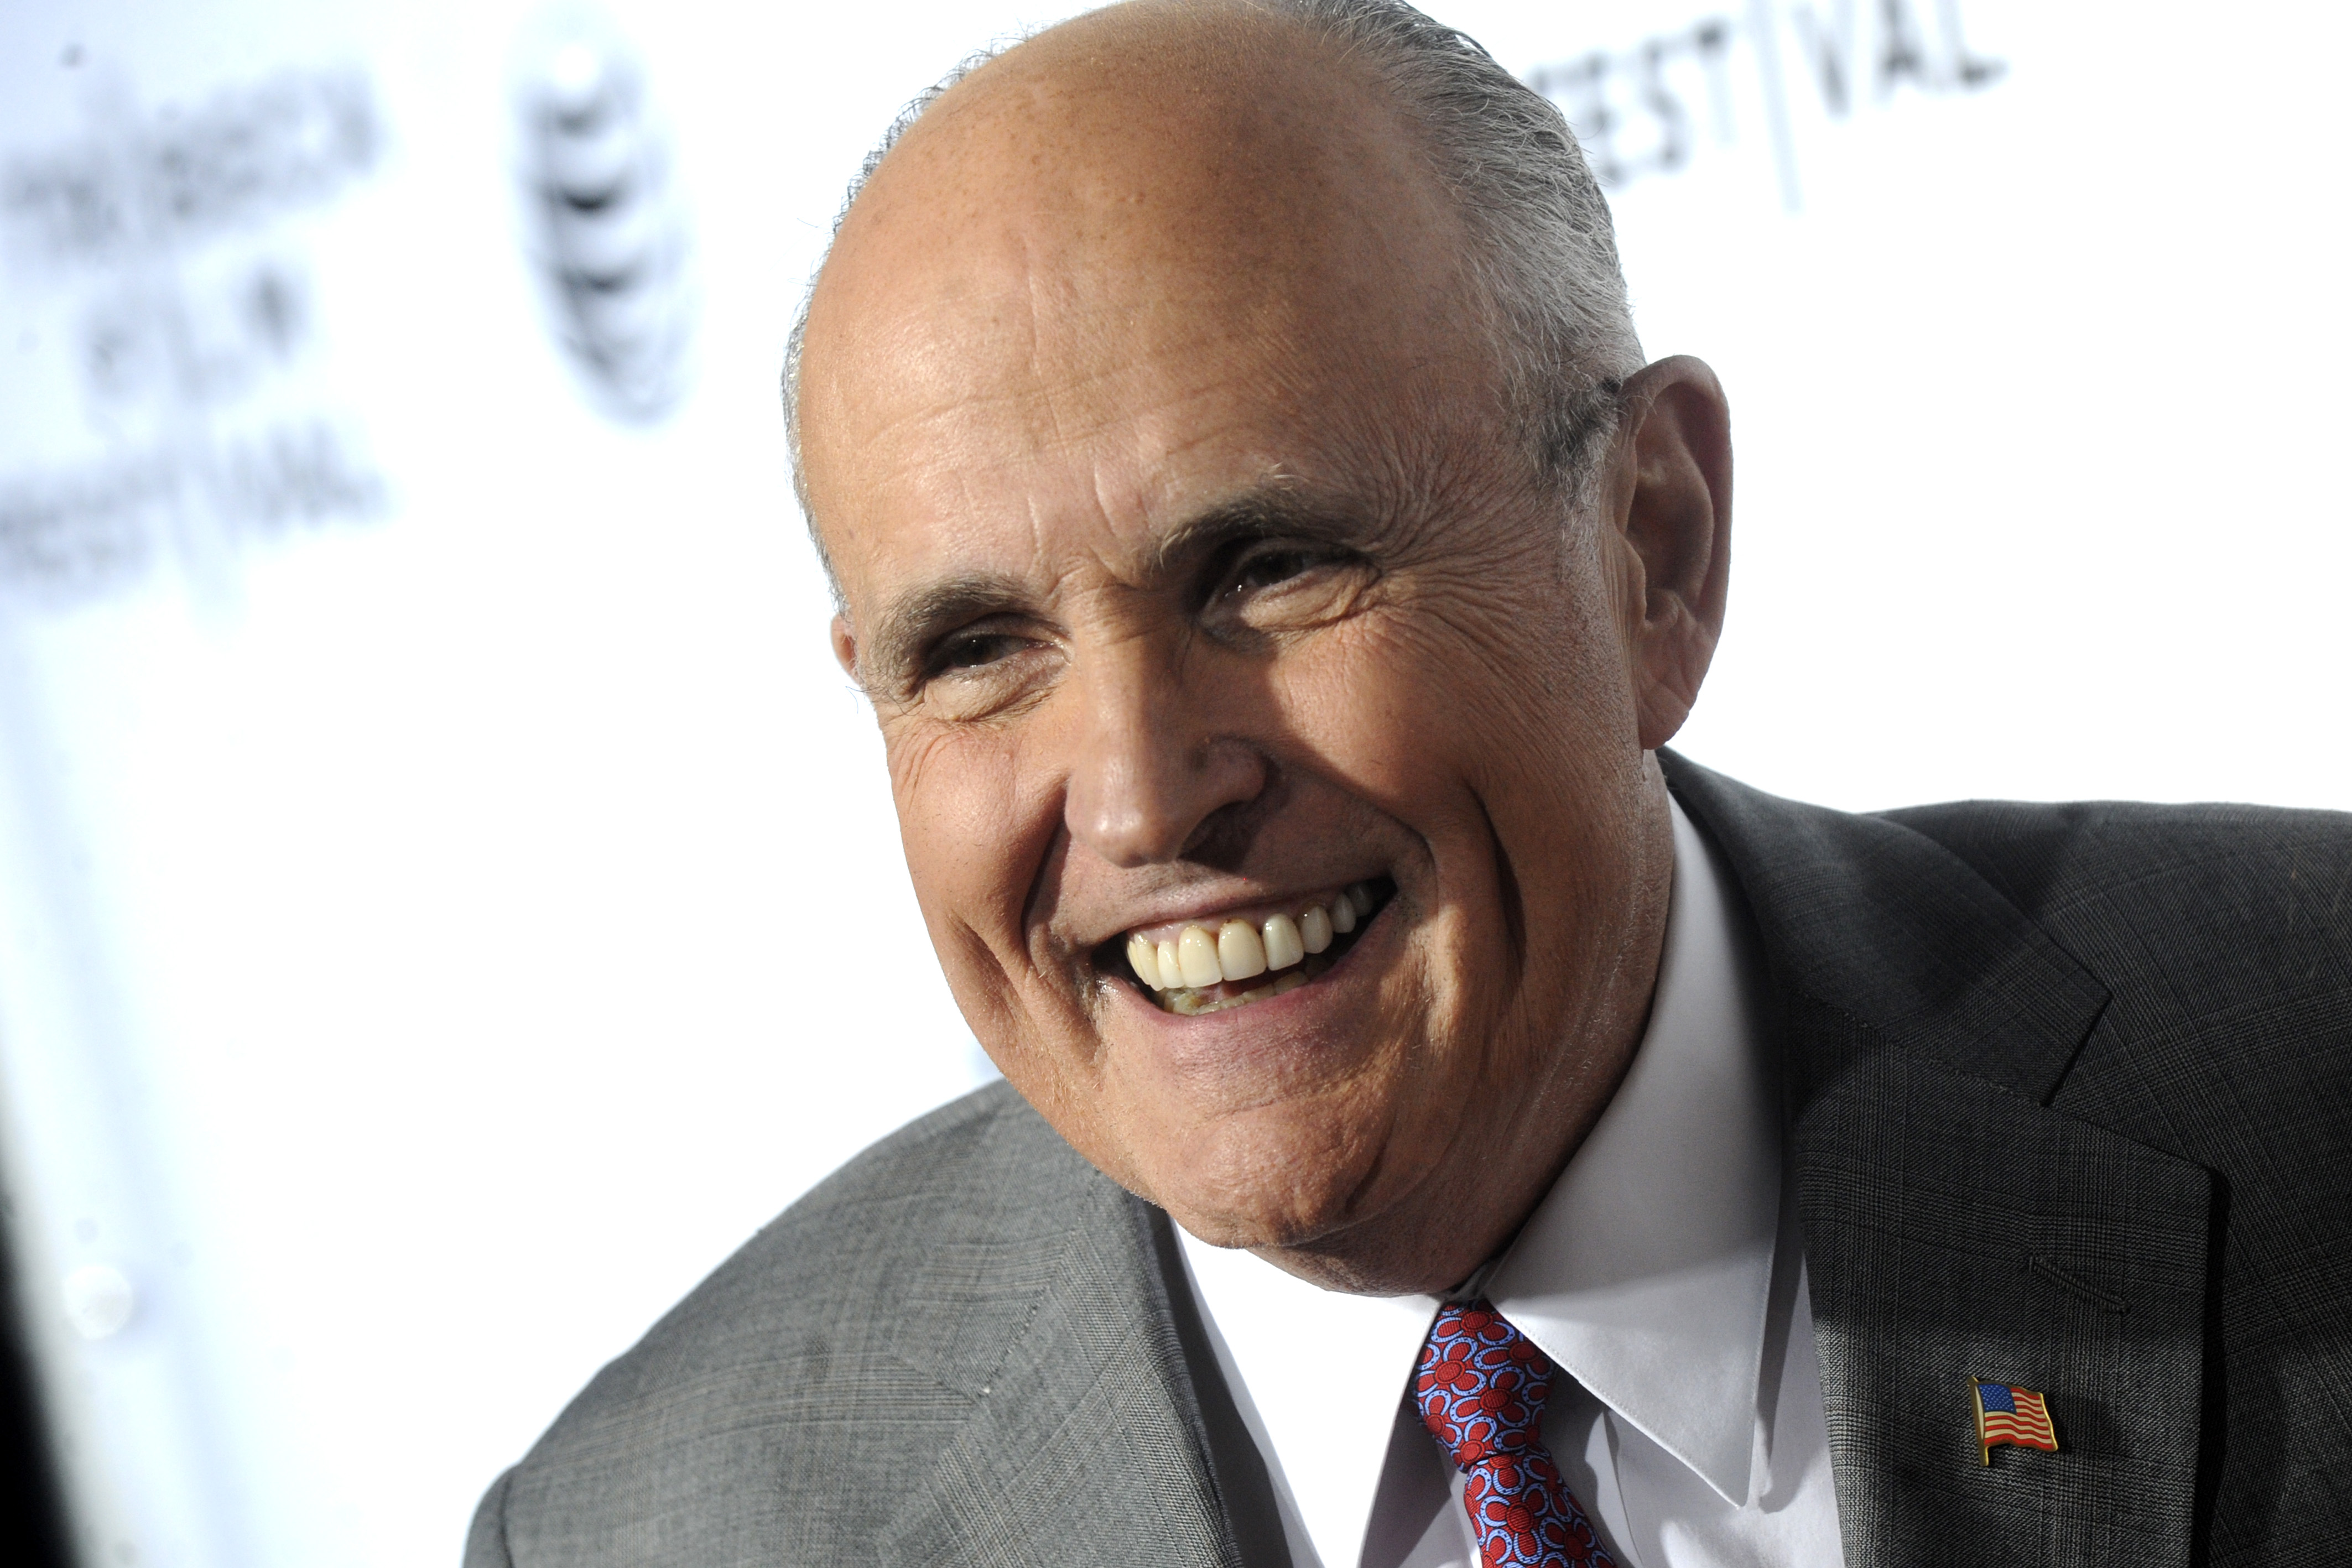 Opening Night premiere of 'Live From New York!' during the 2015 Tribeca Film Festival at the Beacon Theatre in New York City Featuring: Rudy Giuliani Where: New York, New York, United States When: 15 Apr 2015 Credit: Dennis Van Tine/Future Image/WENN.com **Not available for publication in Germany, Poland, Russia, Hungary, Slovenia, Czech Republic, Serbia, Croatia, Slovakia**